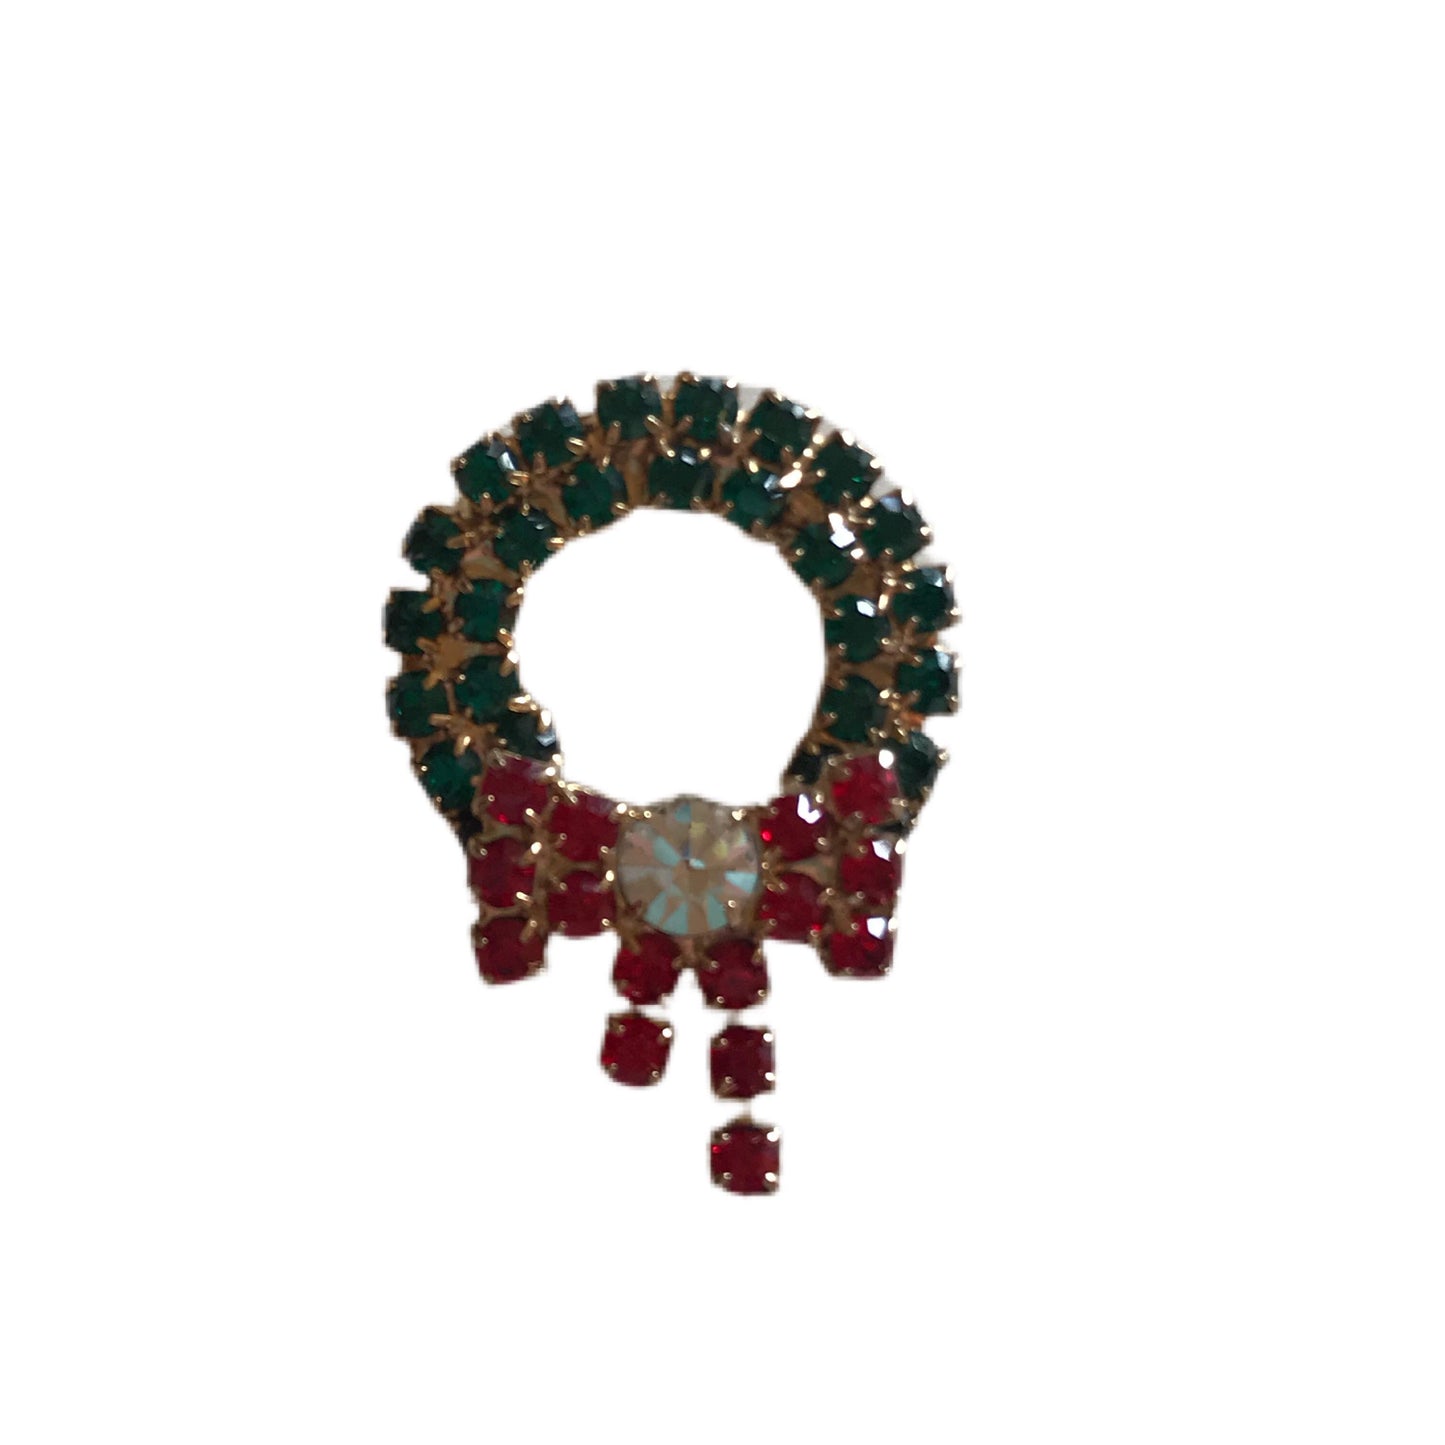 Red Green and Clear Rhinestone Holiday Wreath Brooch circa 1960s